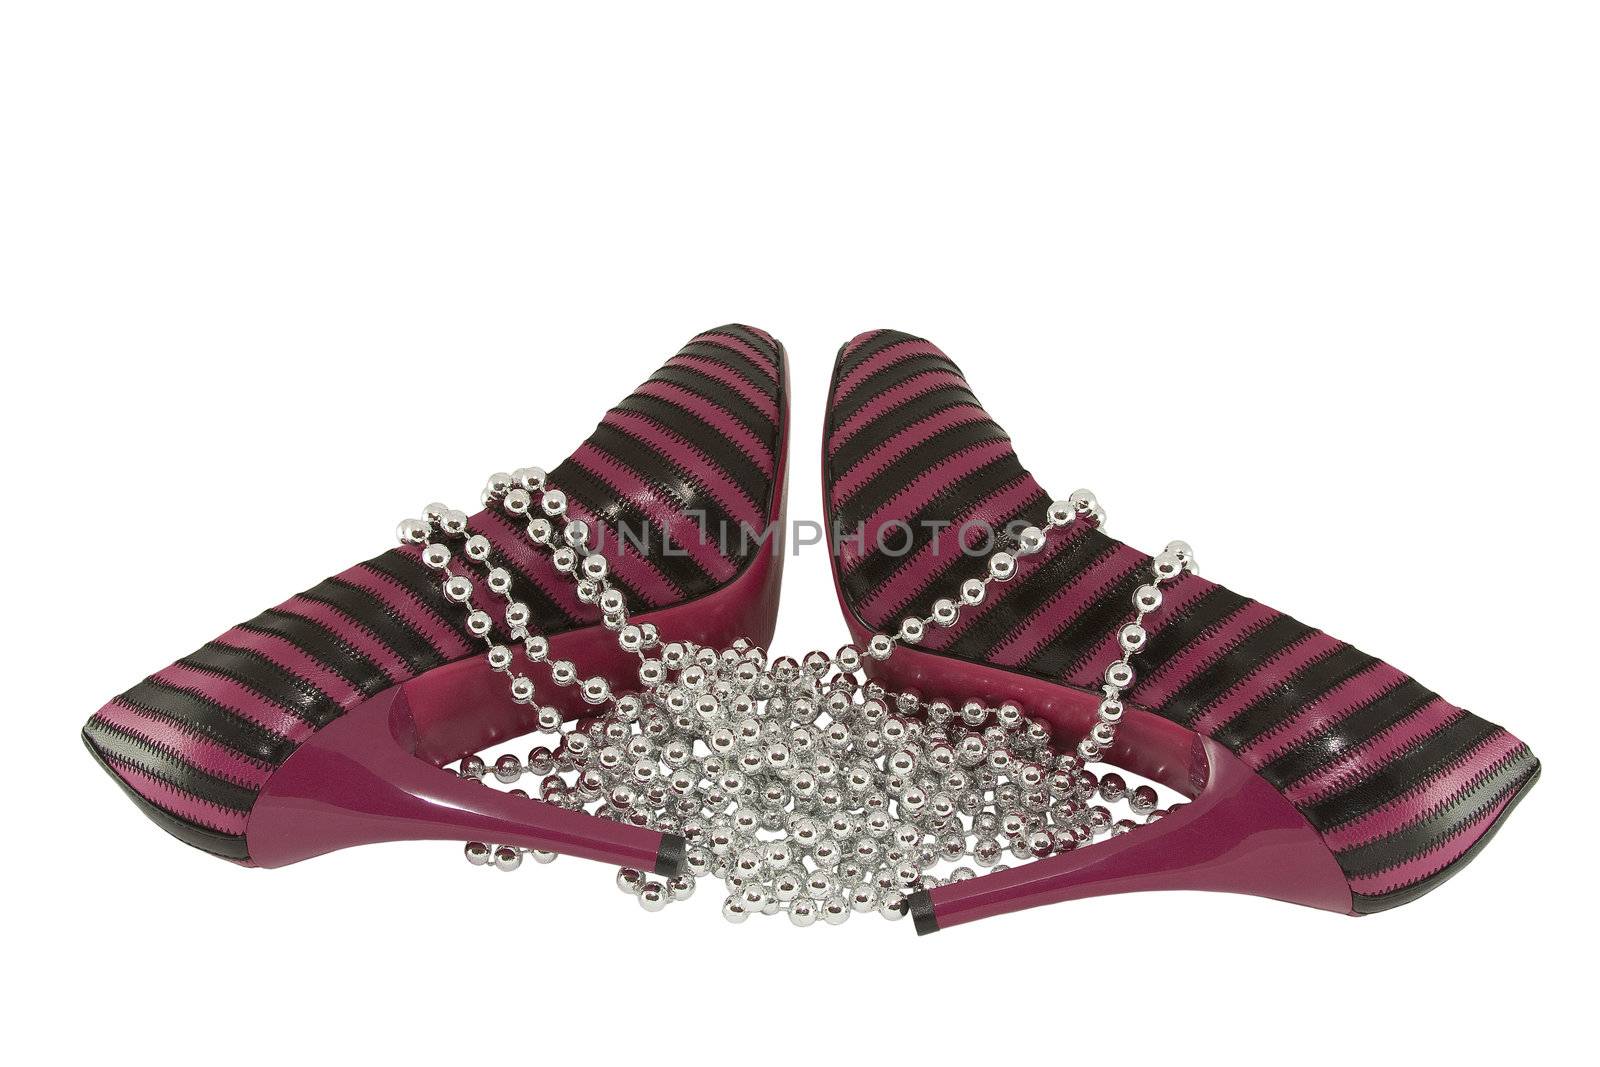 beads and two shoe black and pink by Jaklin